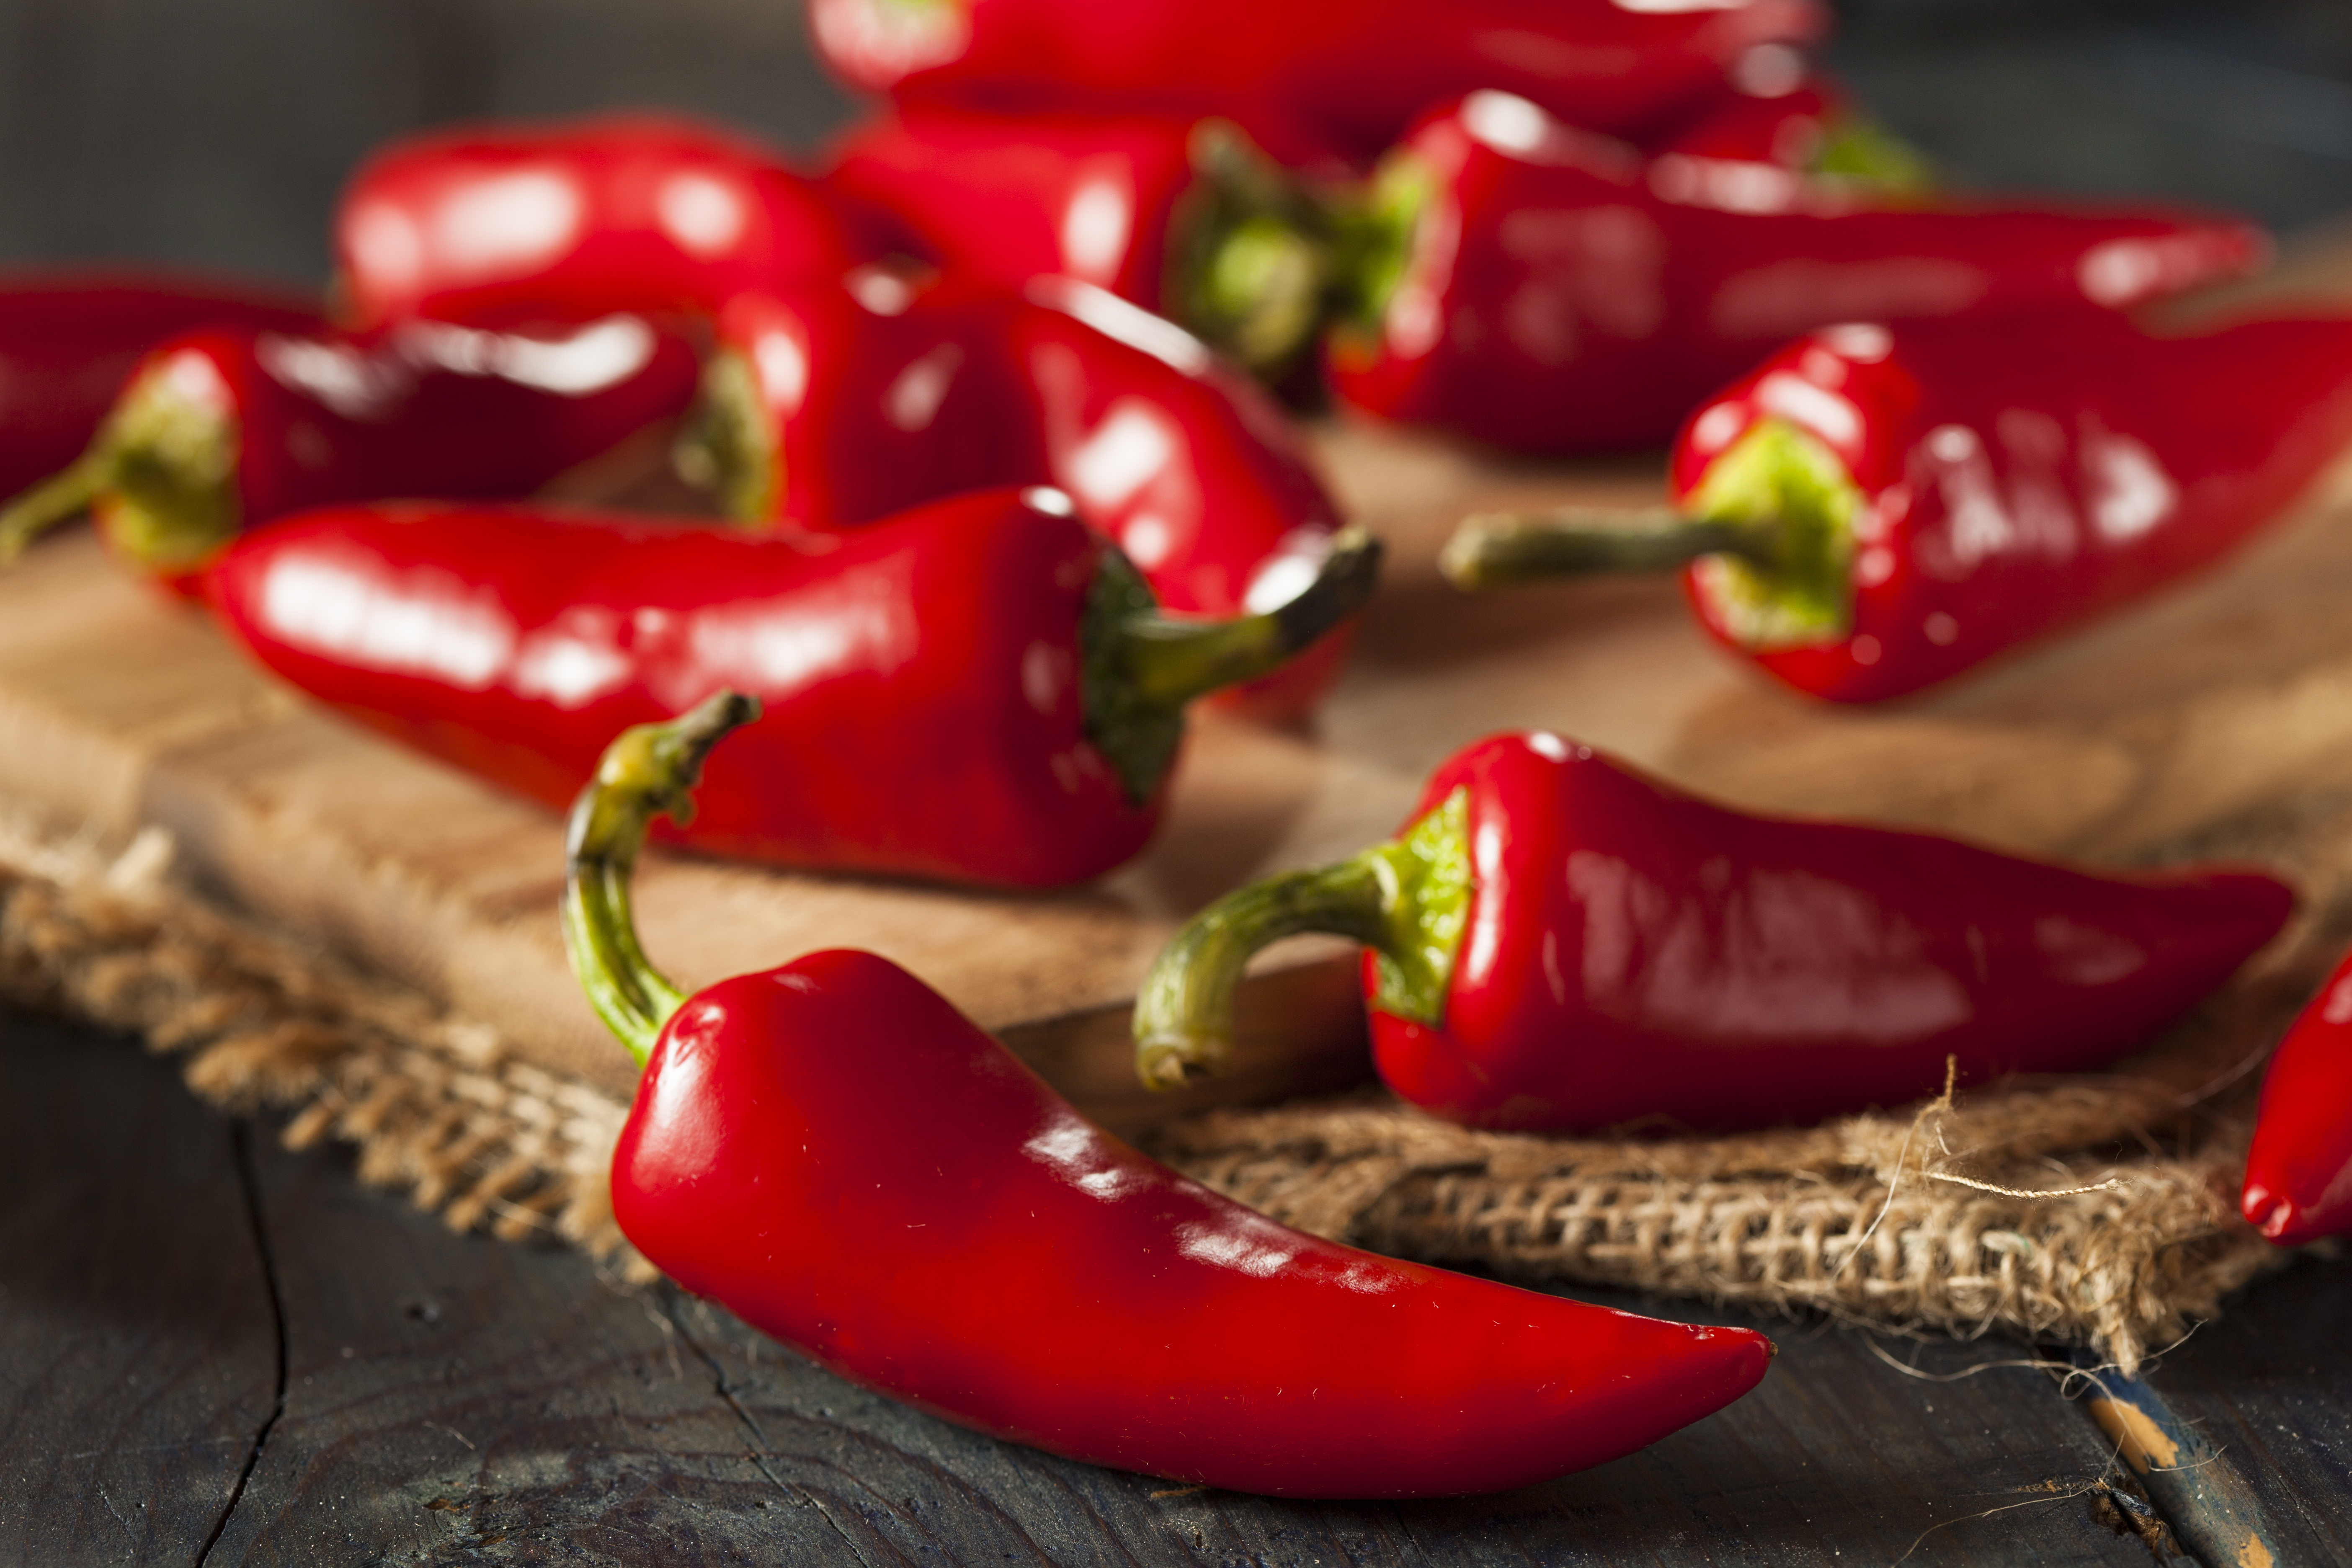 Spice To The Rescue: Chili Patches May Help Lower Pain In Diabetic People